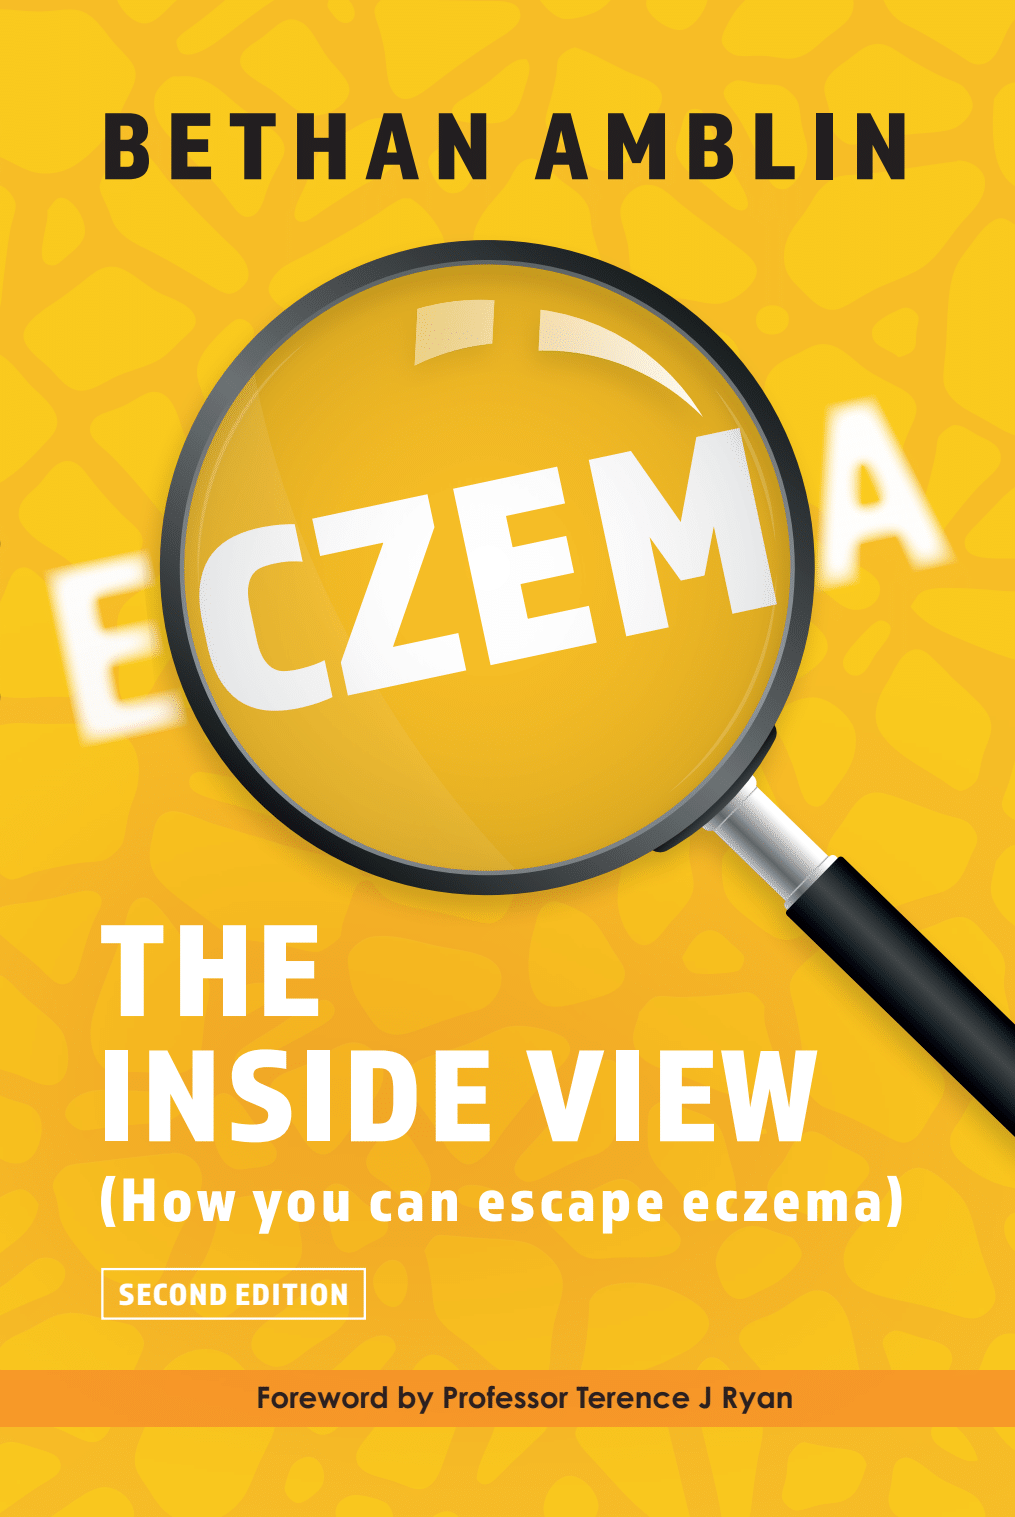 Eczema. The inside view. - Second Edition